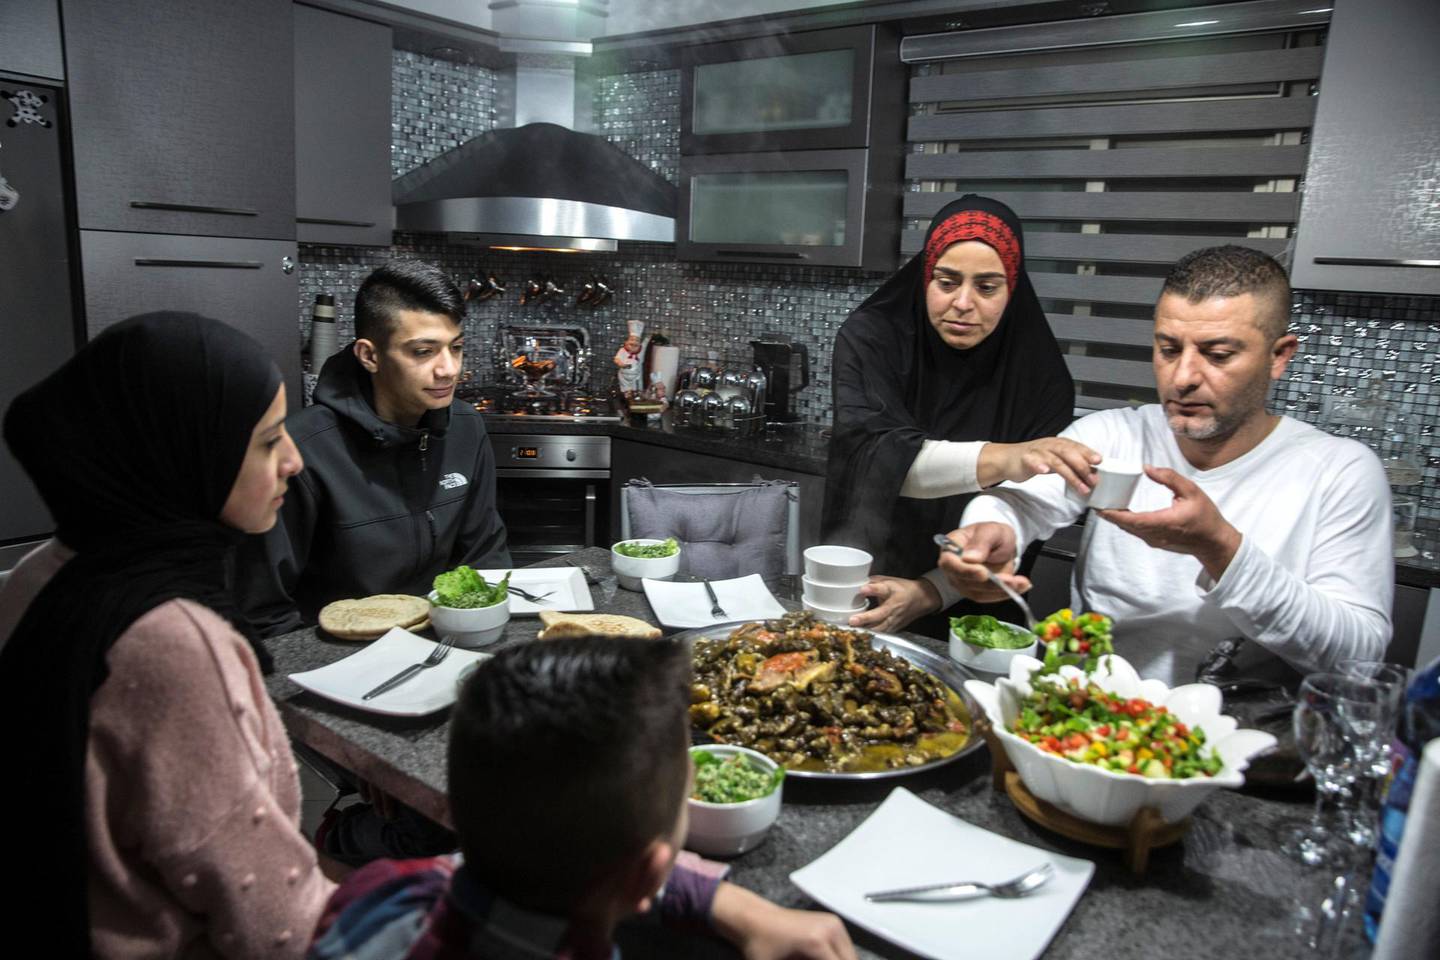 Palestinian Yehiya Derbas (L) with his family during a Saturday afternoon lunch at his home in  Issawiyah, a hardened and impoverished east Jerusalem neighborhood on March 9,2019.The day the Trump administration announced last December that it would be moving the United States Embassy to Jerusalem, Yehiya DerbasÕ life changed forever.  Derbas, then a slight 16-year-old, joined in Palestinian protests against the move. And like many young men before and after him, Derbas told The National that Israeli forces shot him and later imprisoned him for one year on charges related to the dayÕs violence.  

Upon his release in early February, now marked as an ex-con, Derbas returned to a city that in most ways has remained the same day-to-day Ñ but that intangibly has significantly changed. (Photo by Heidi Levine For The National).
